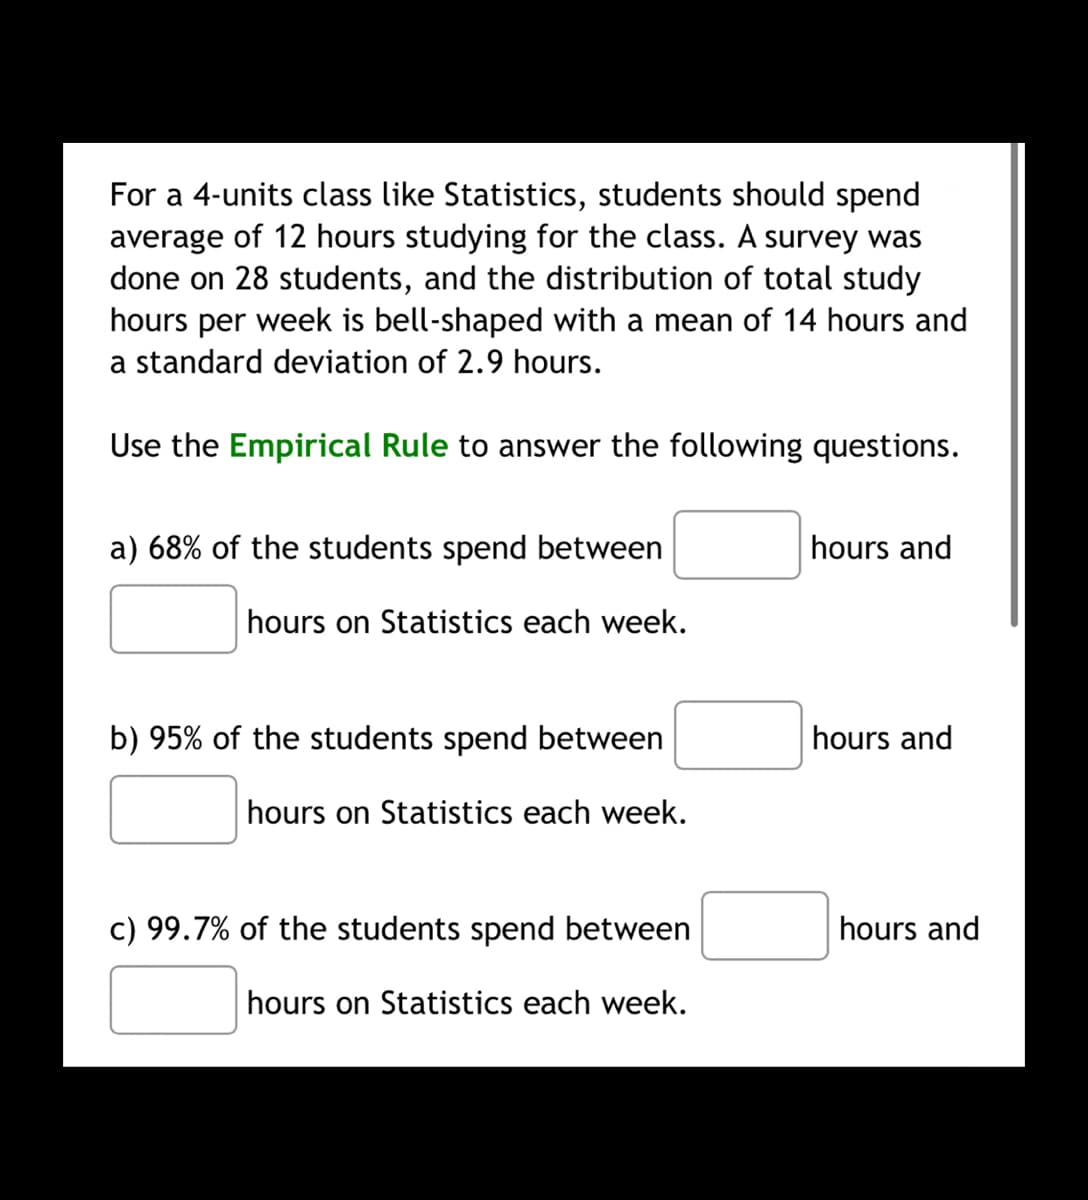 For a 4-units class like Statistics, students should spend
average of 12 hours studying for the class. A survey was
done on 28 students, and the distribution of total study
hours per week is bell-shaped with a mean of 14 hours and
a standard deviation of 2.9 hours.
Use the Empirical Rule to answer the following questions.
a) 68% of the students spend between
hours and
hours on Statistics each week.
b) 95% of the students spend between
hours and
hours on Statistics each week.
c) 99.7% of the students spend between
hours and
hours on Statistics each week.
